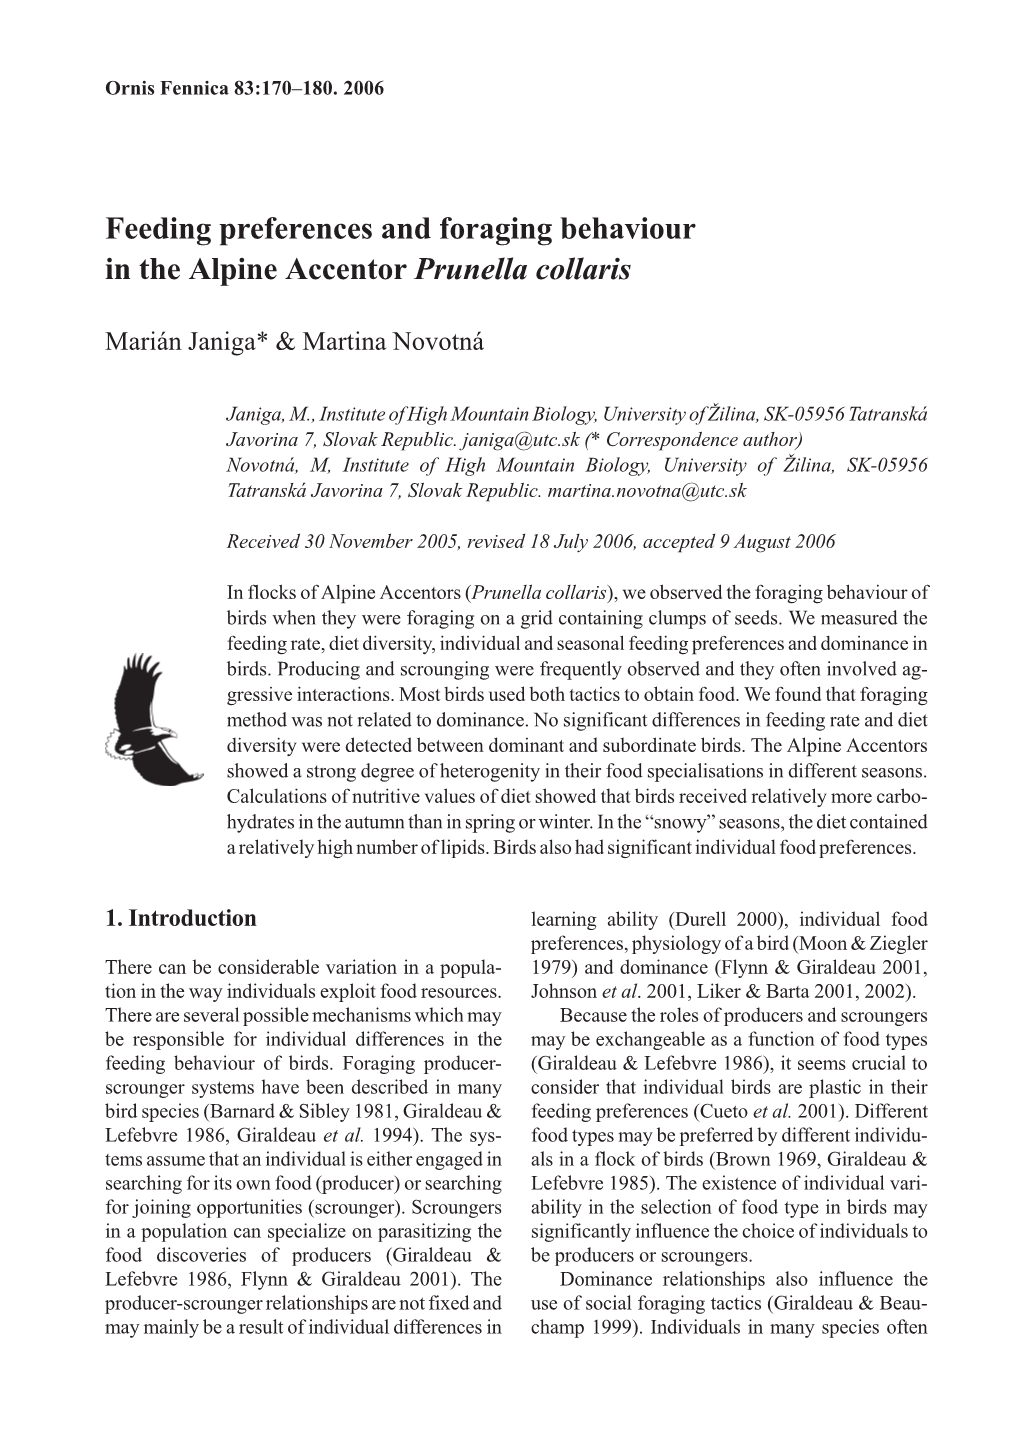 Feeding Preferences and Foraging Behaviour in the Alpine Accentor Prunella Collaris